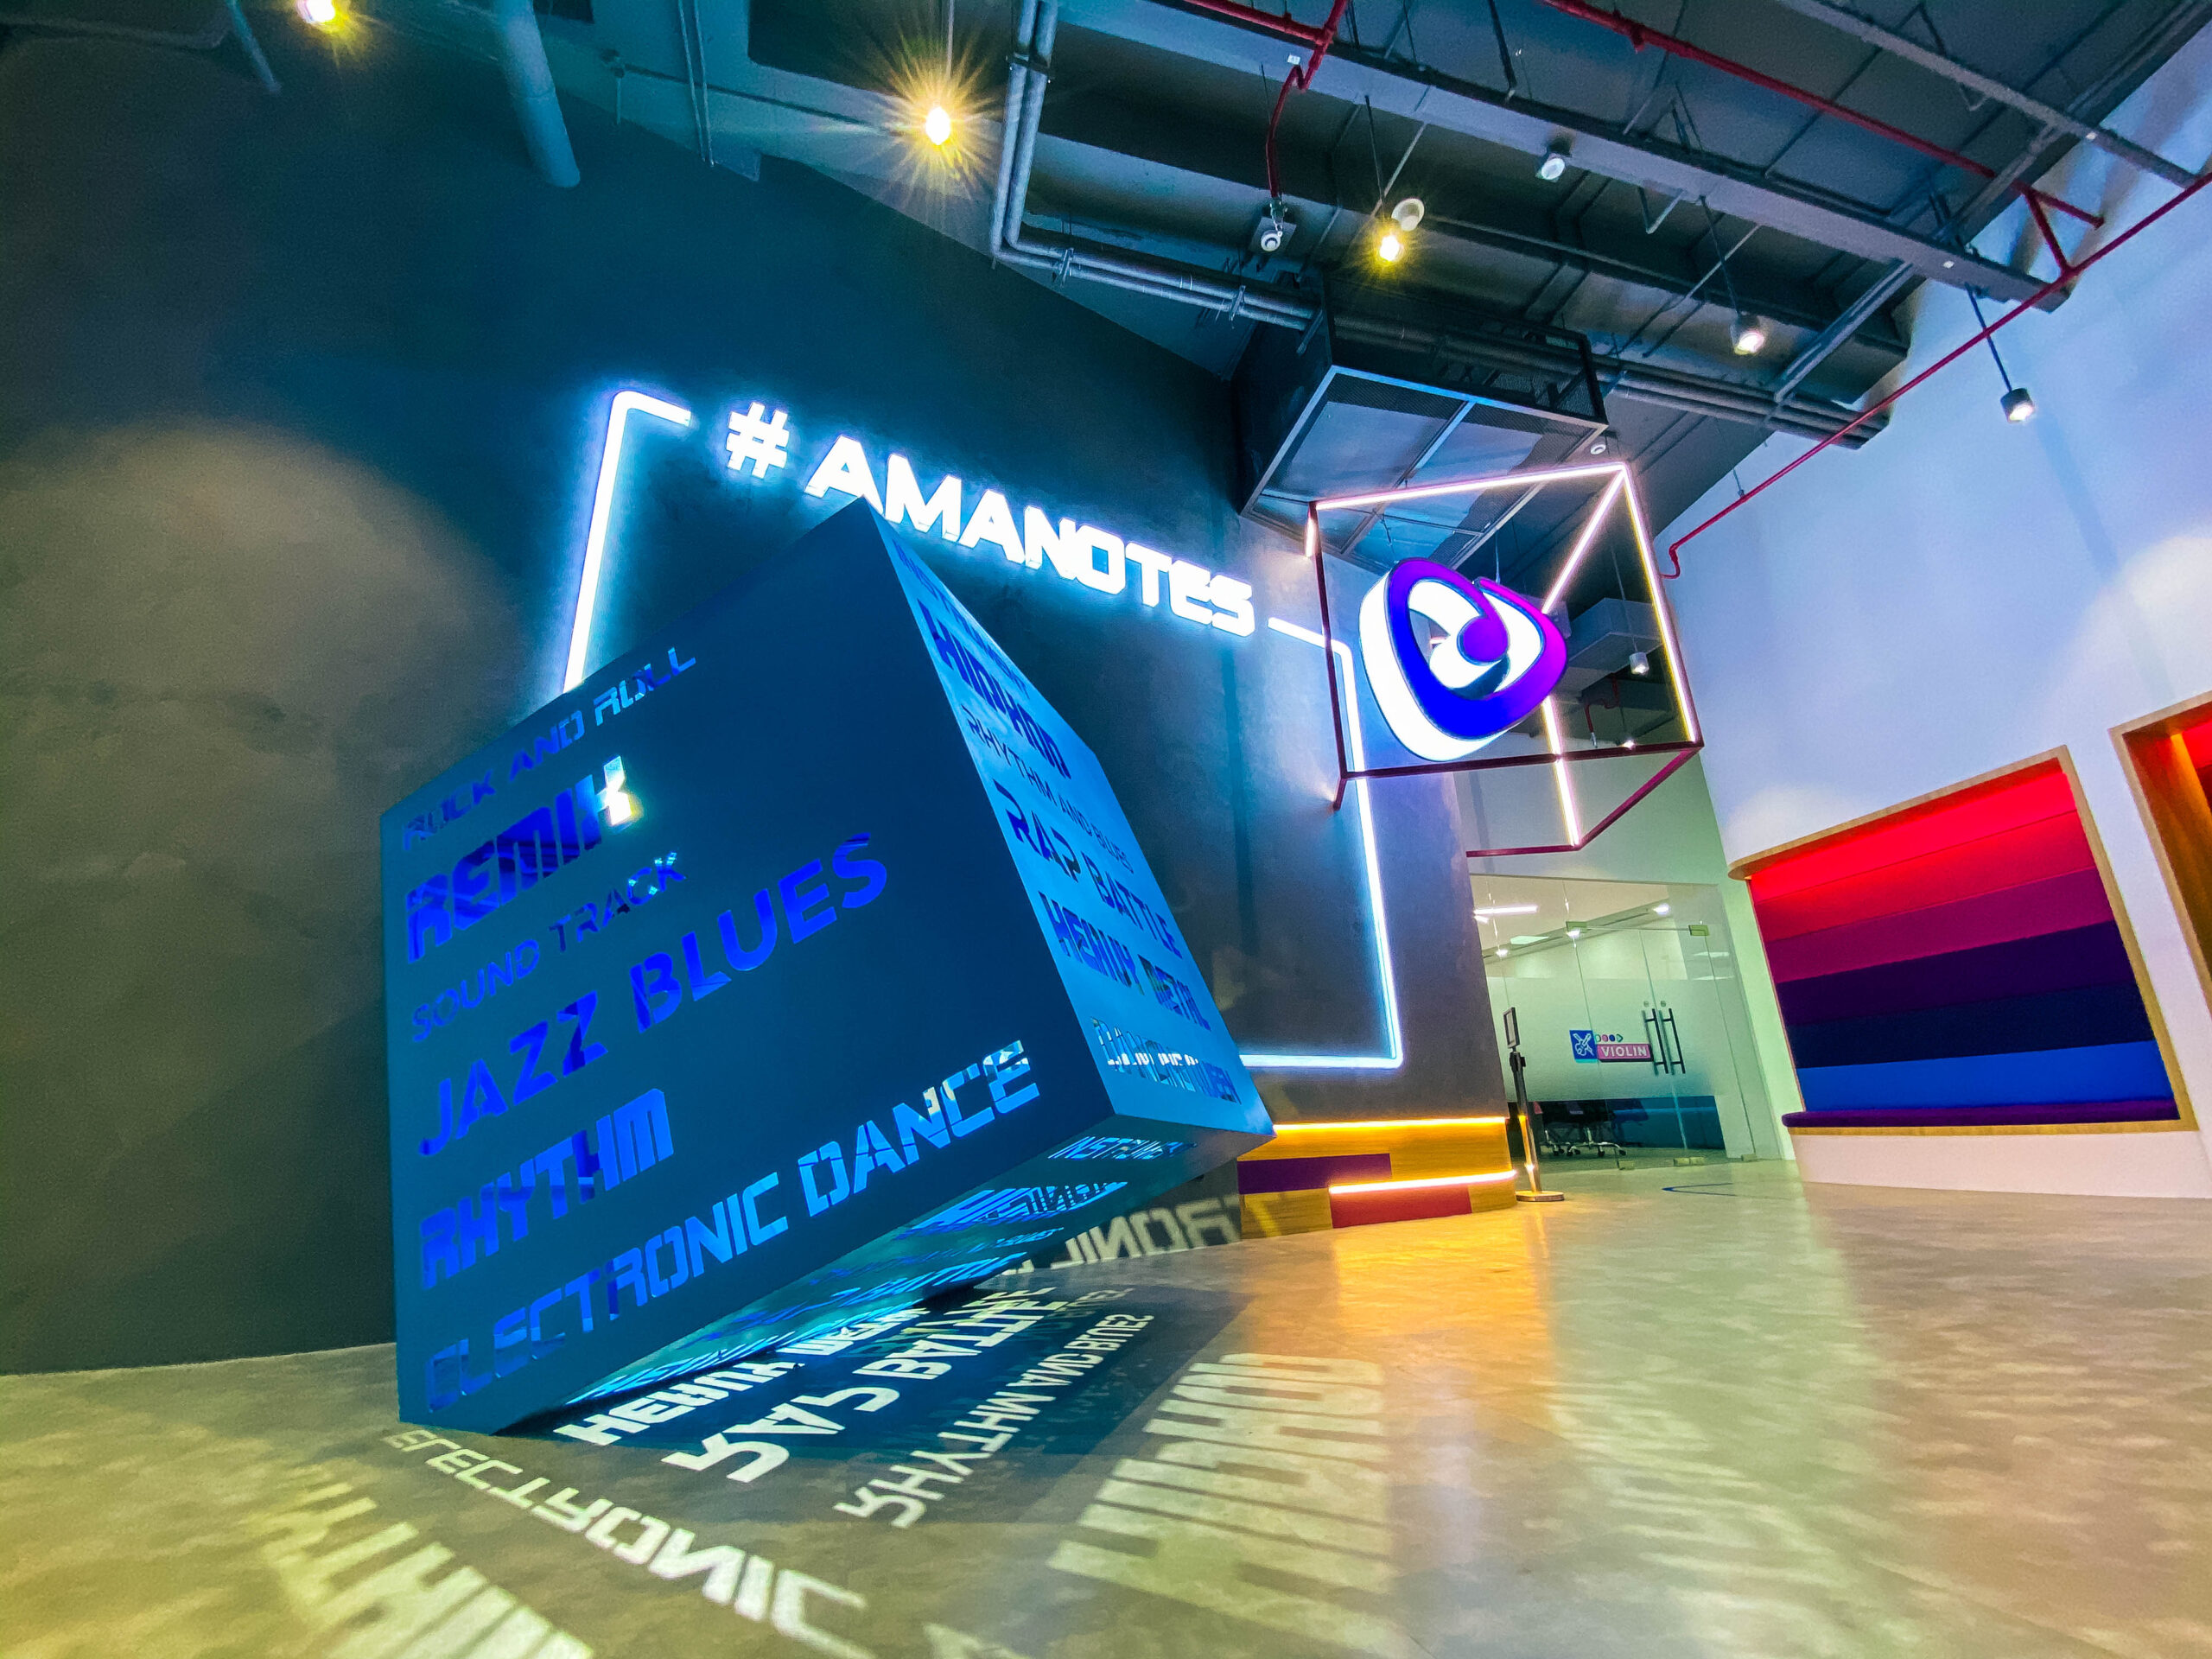 Amanotes opens up immersive musical gaming experiences for all as it reaches 1.4+ billion downloads milestone